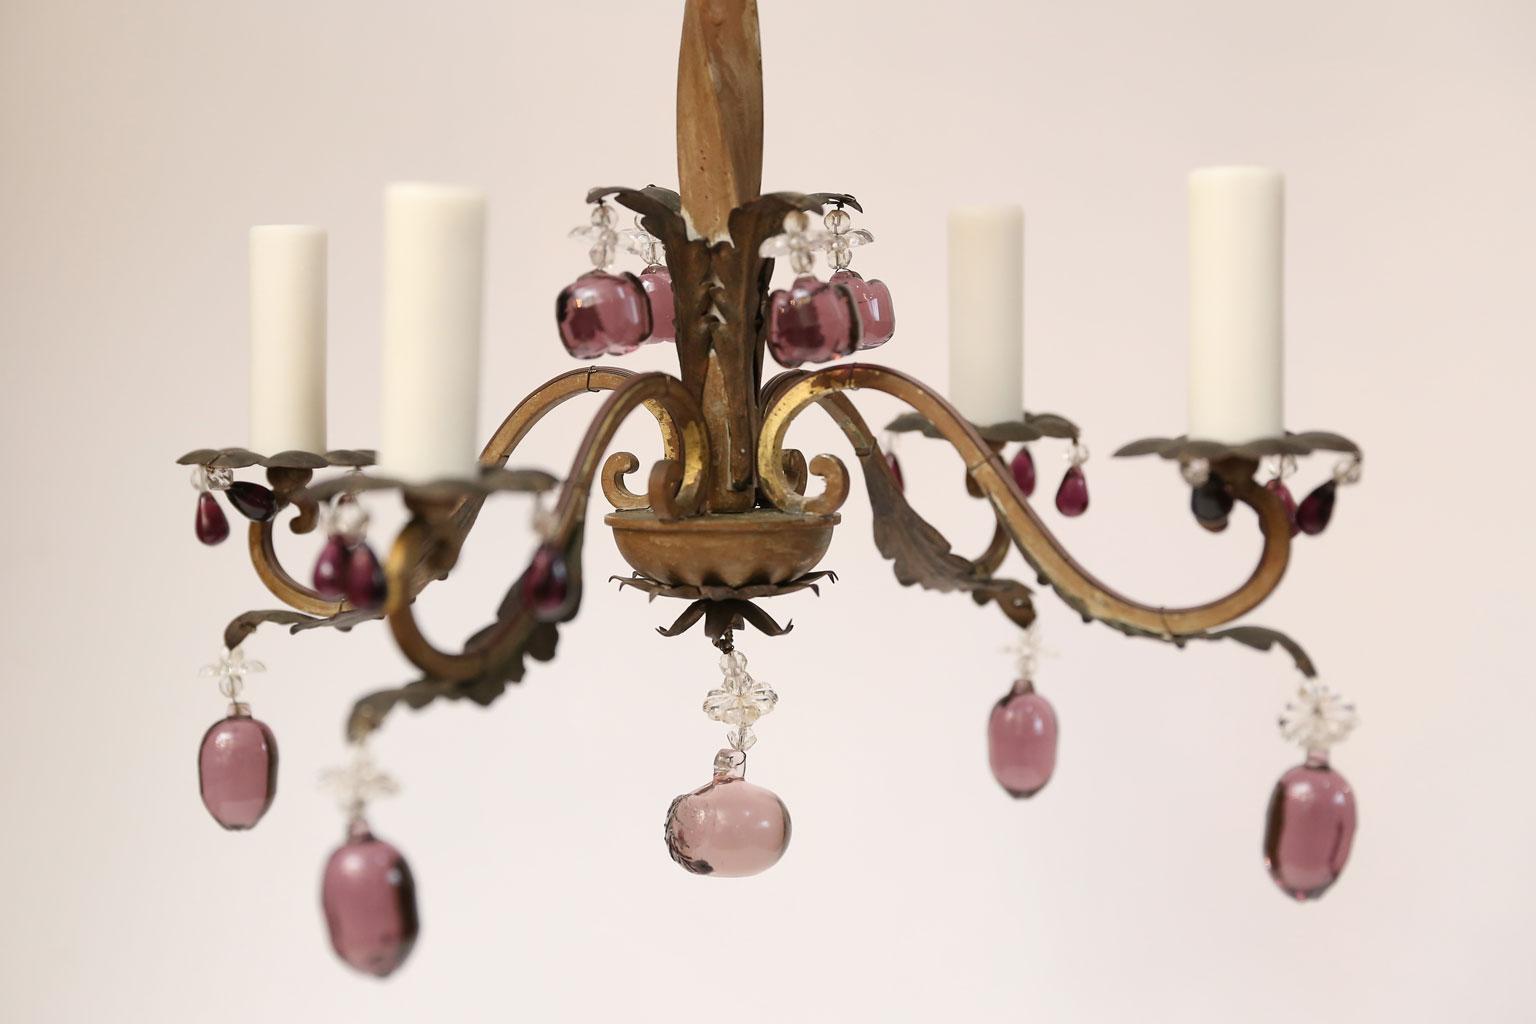 Wrought Iron French Romantic Iron and Crystal Chandelier With Amethyst-Colored Drops